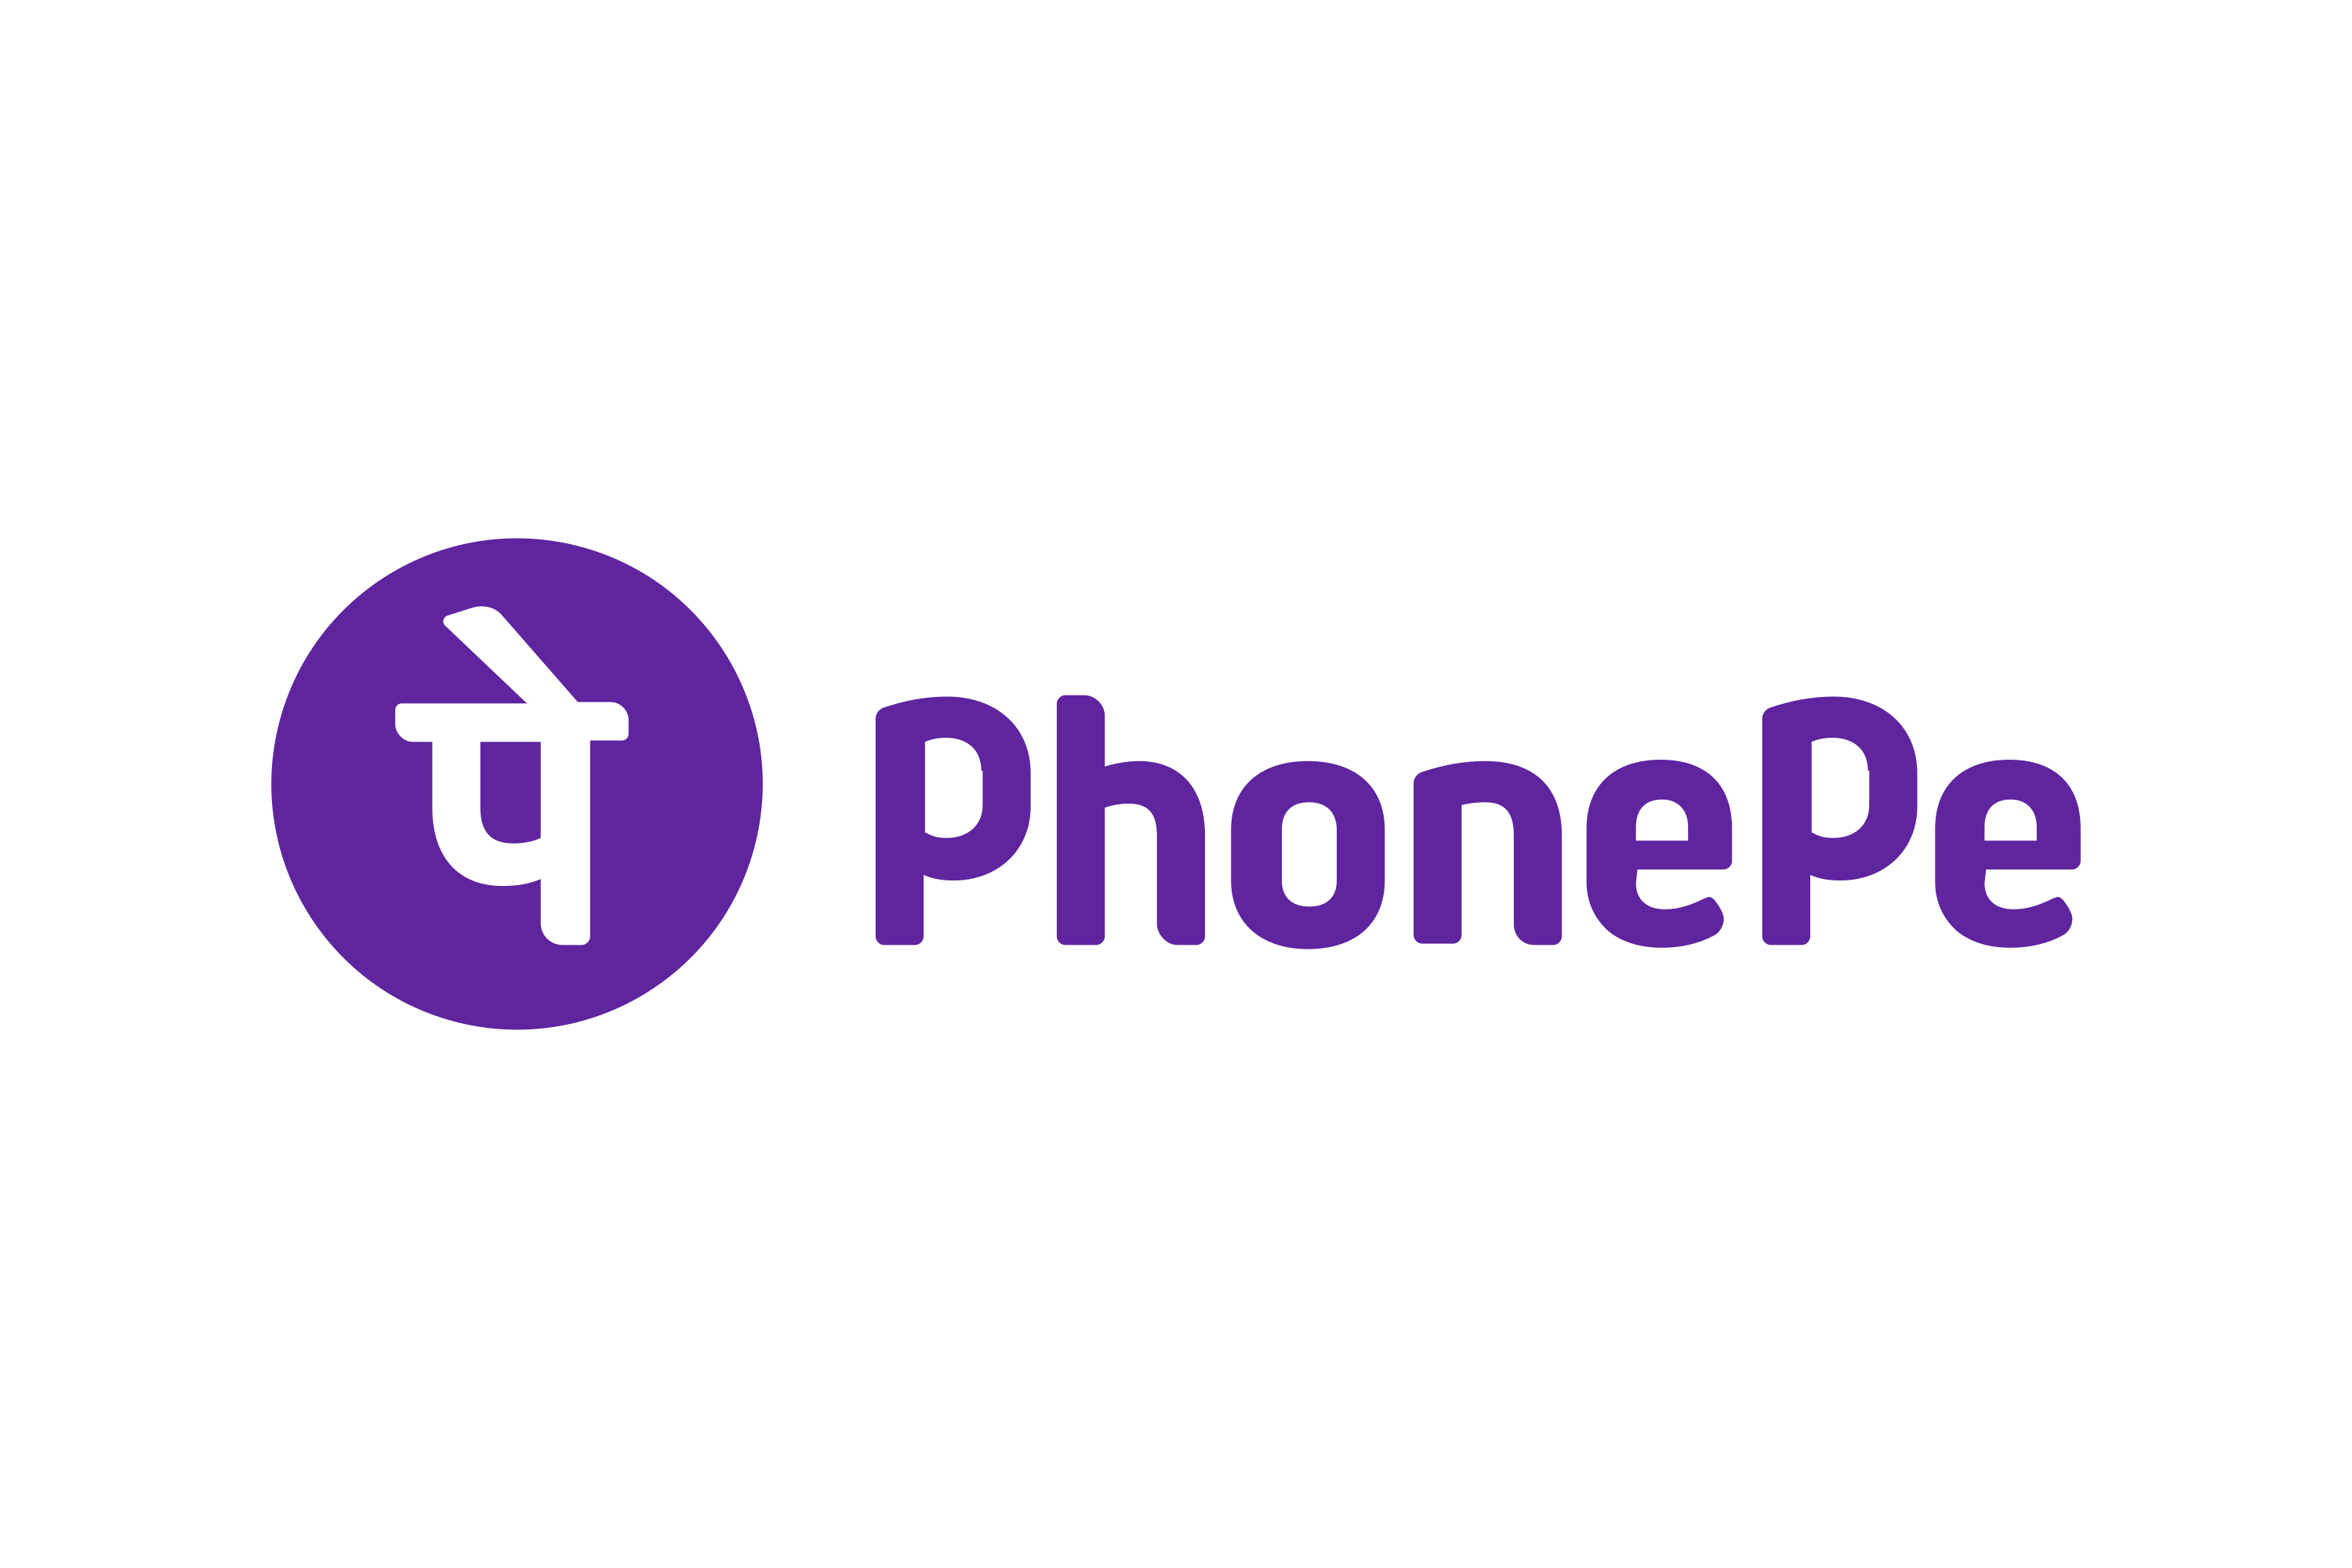 phonepe customer care number